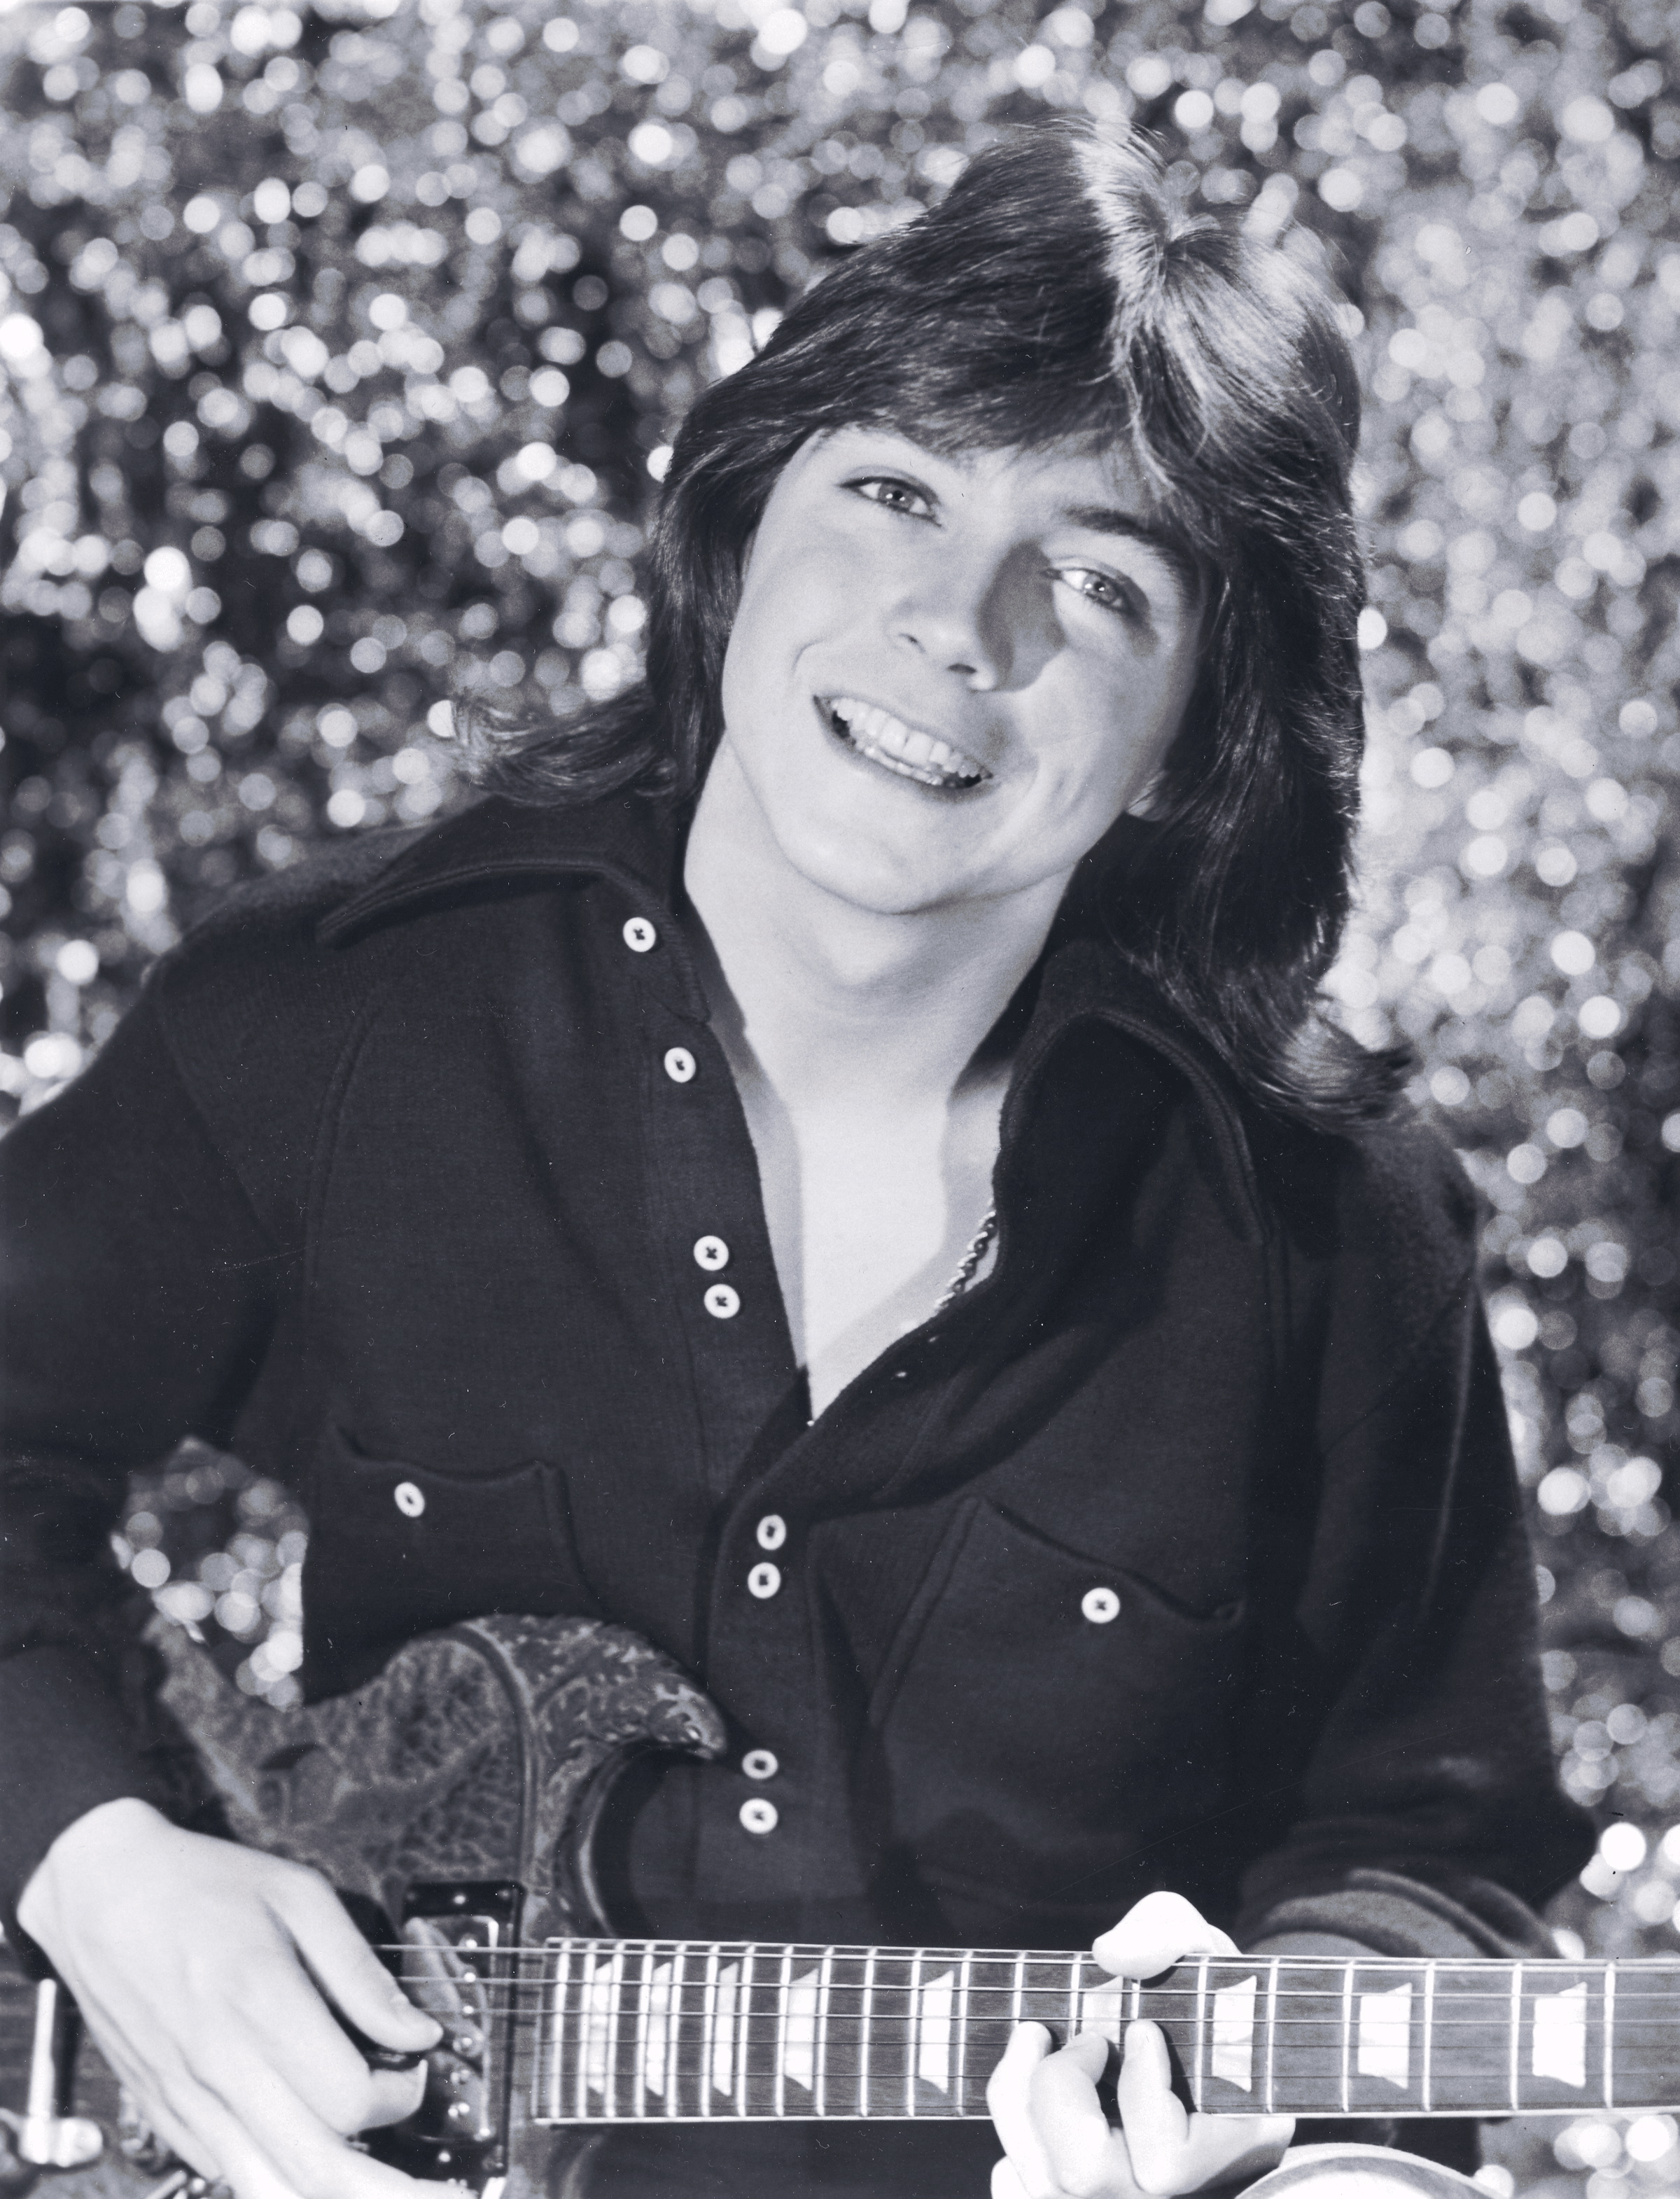 Singer David Cassidy, circa 1970 | Source: Getty Images